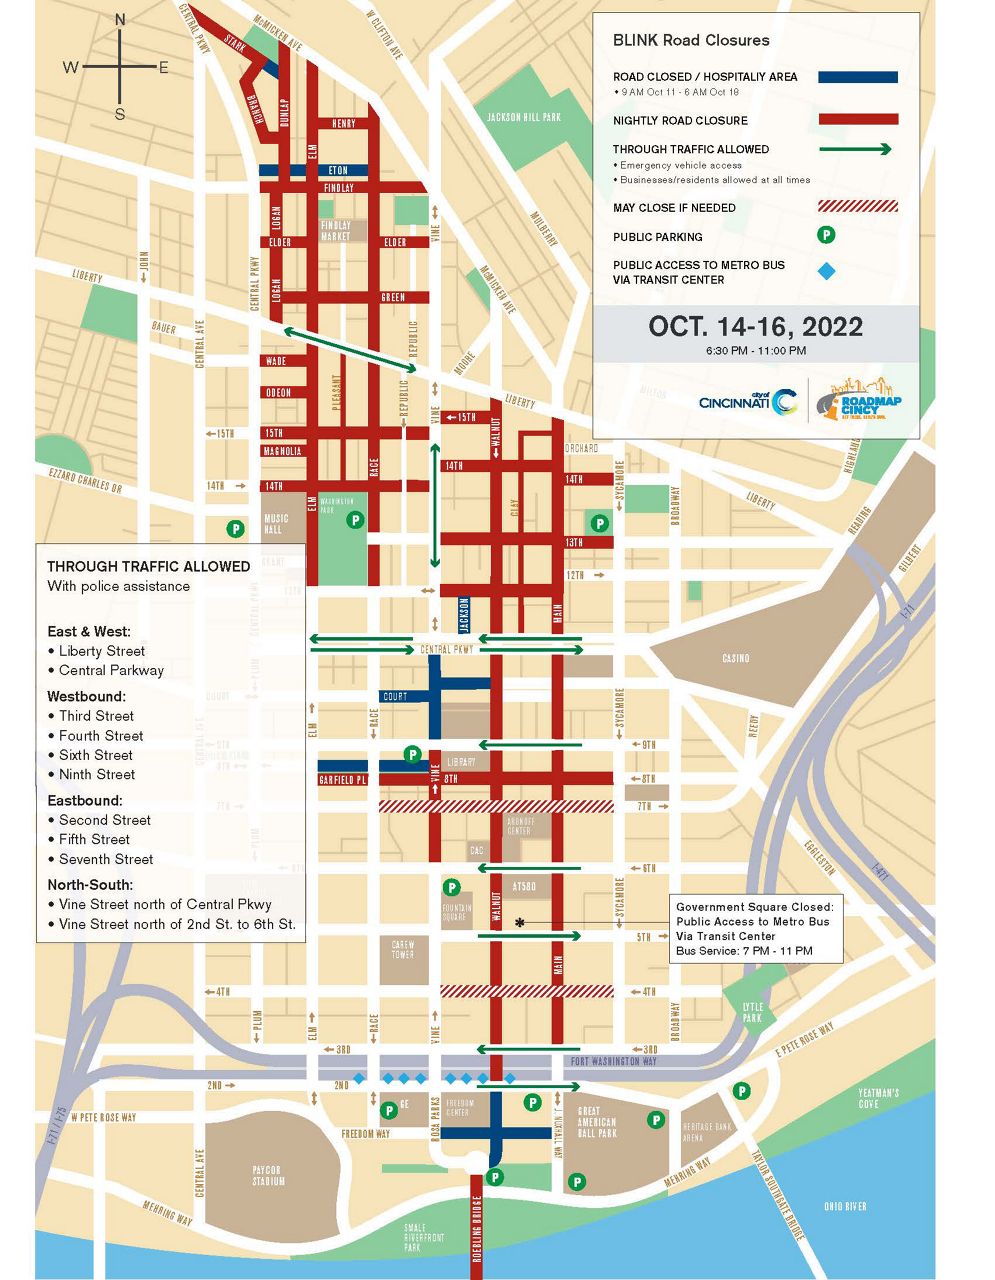 A map of all traffic-related impacts in Cincinnati for BLINK. (Photo courtesy of City of Cincinnati)